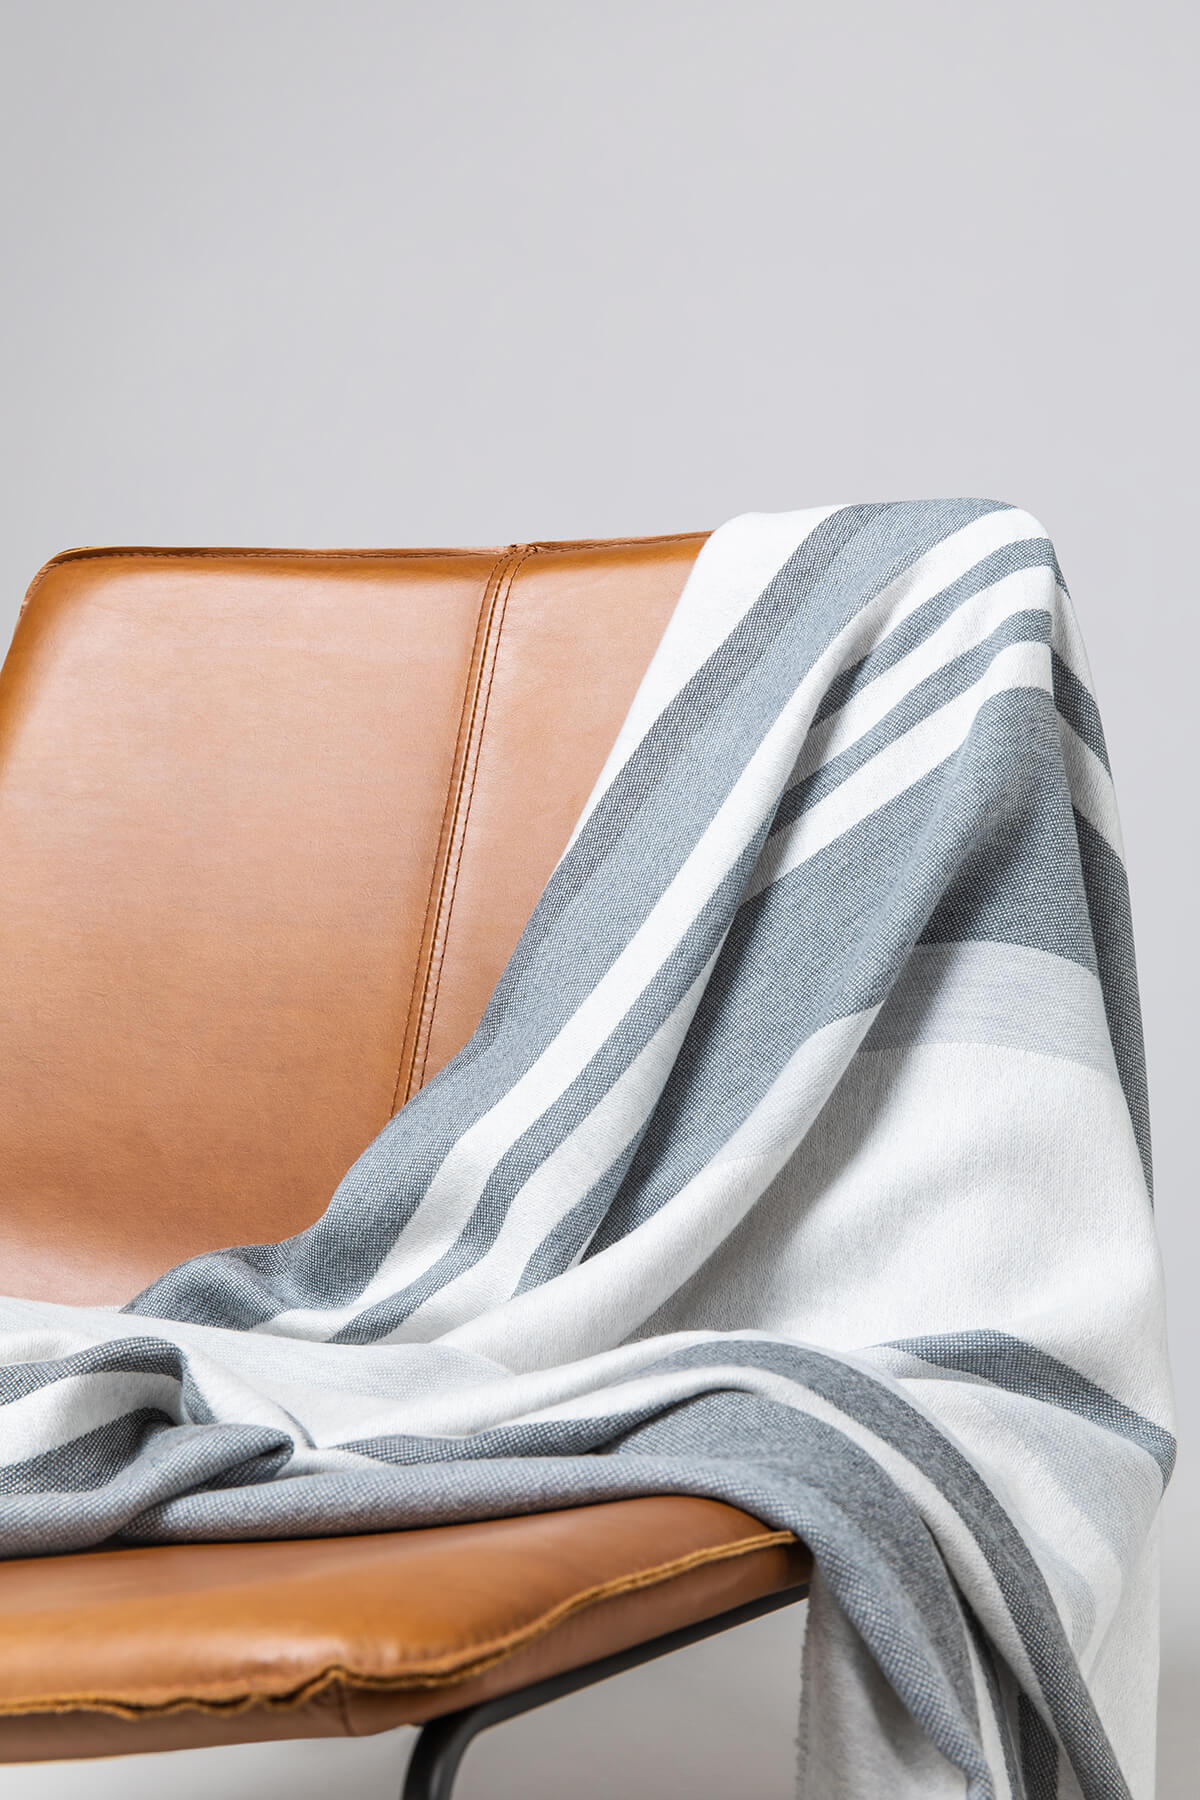 Johnstons of Elgin’s Bold Stripe Grey Merino Throw on brown chair on a grey background WD000257RU6994ONE